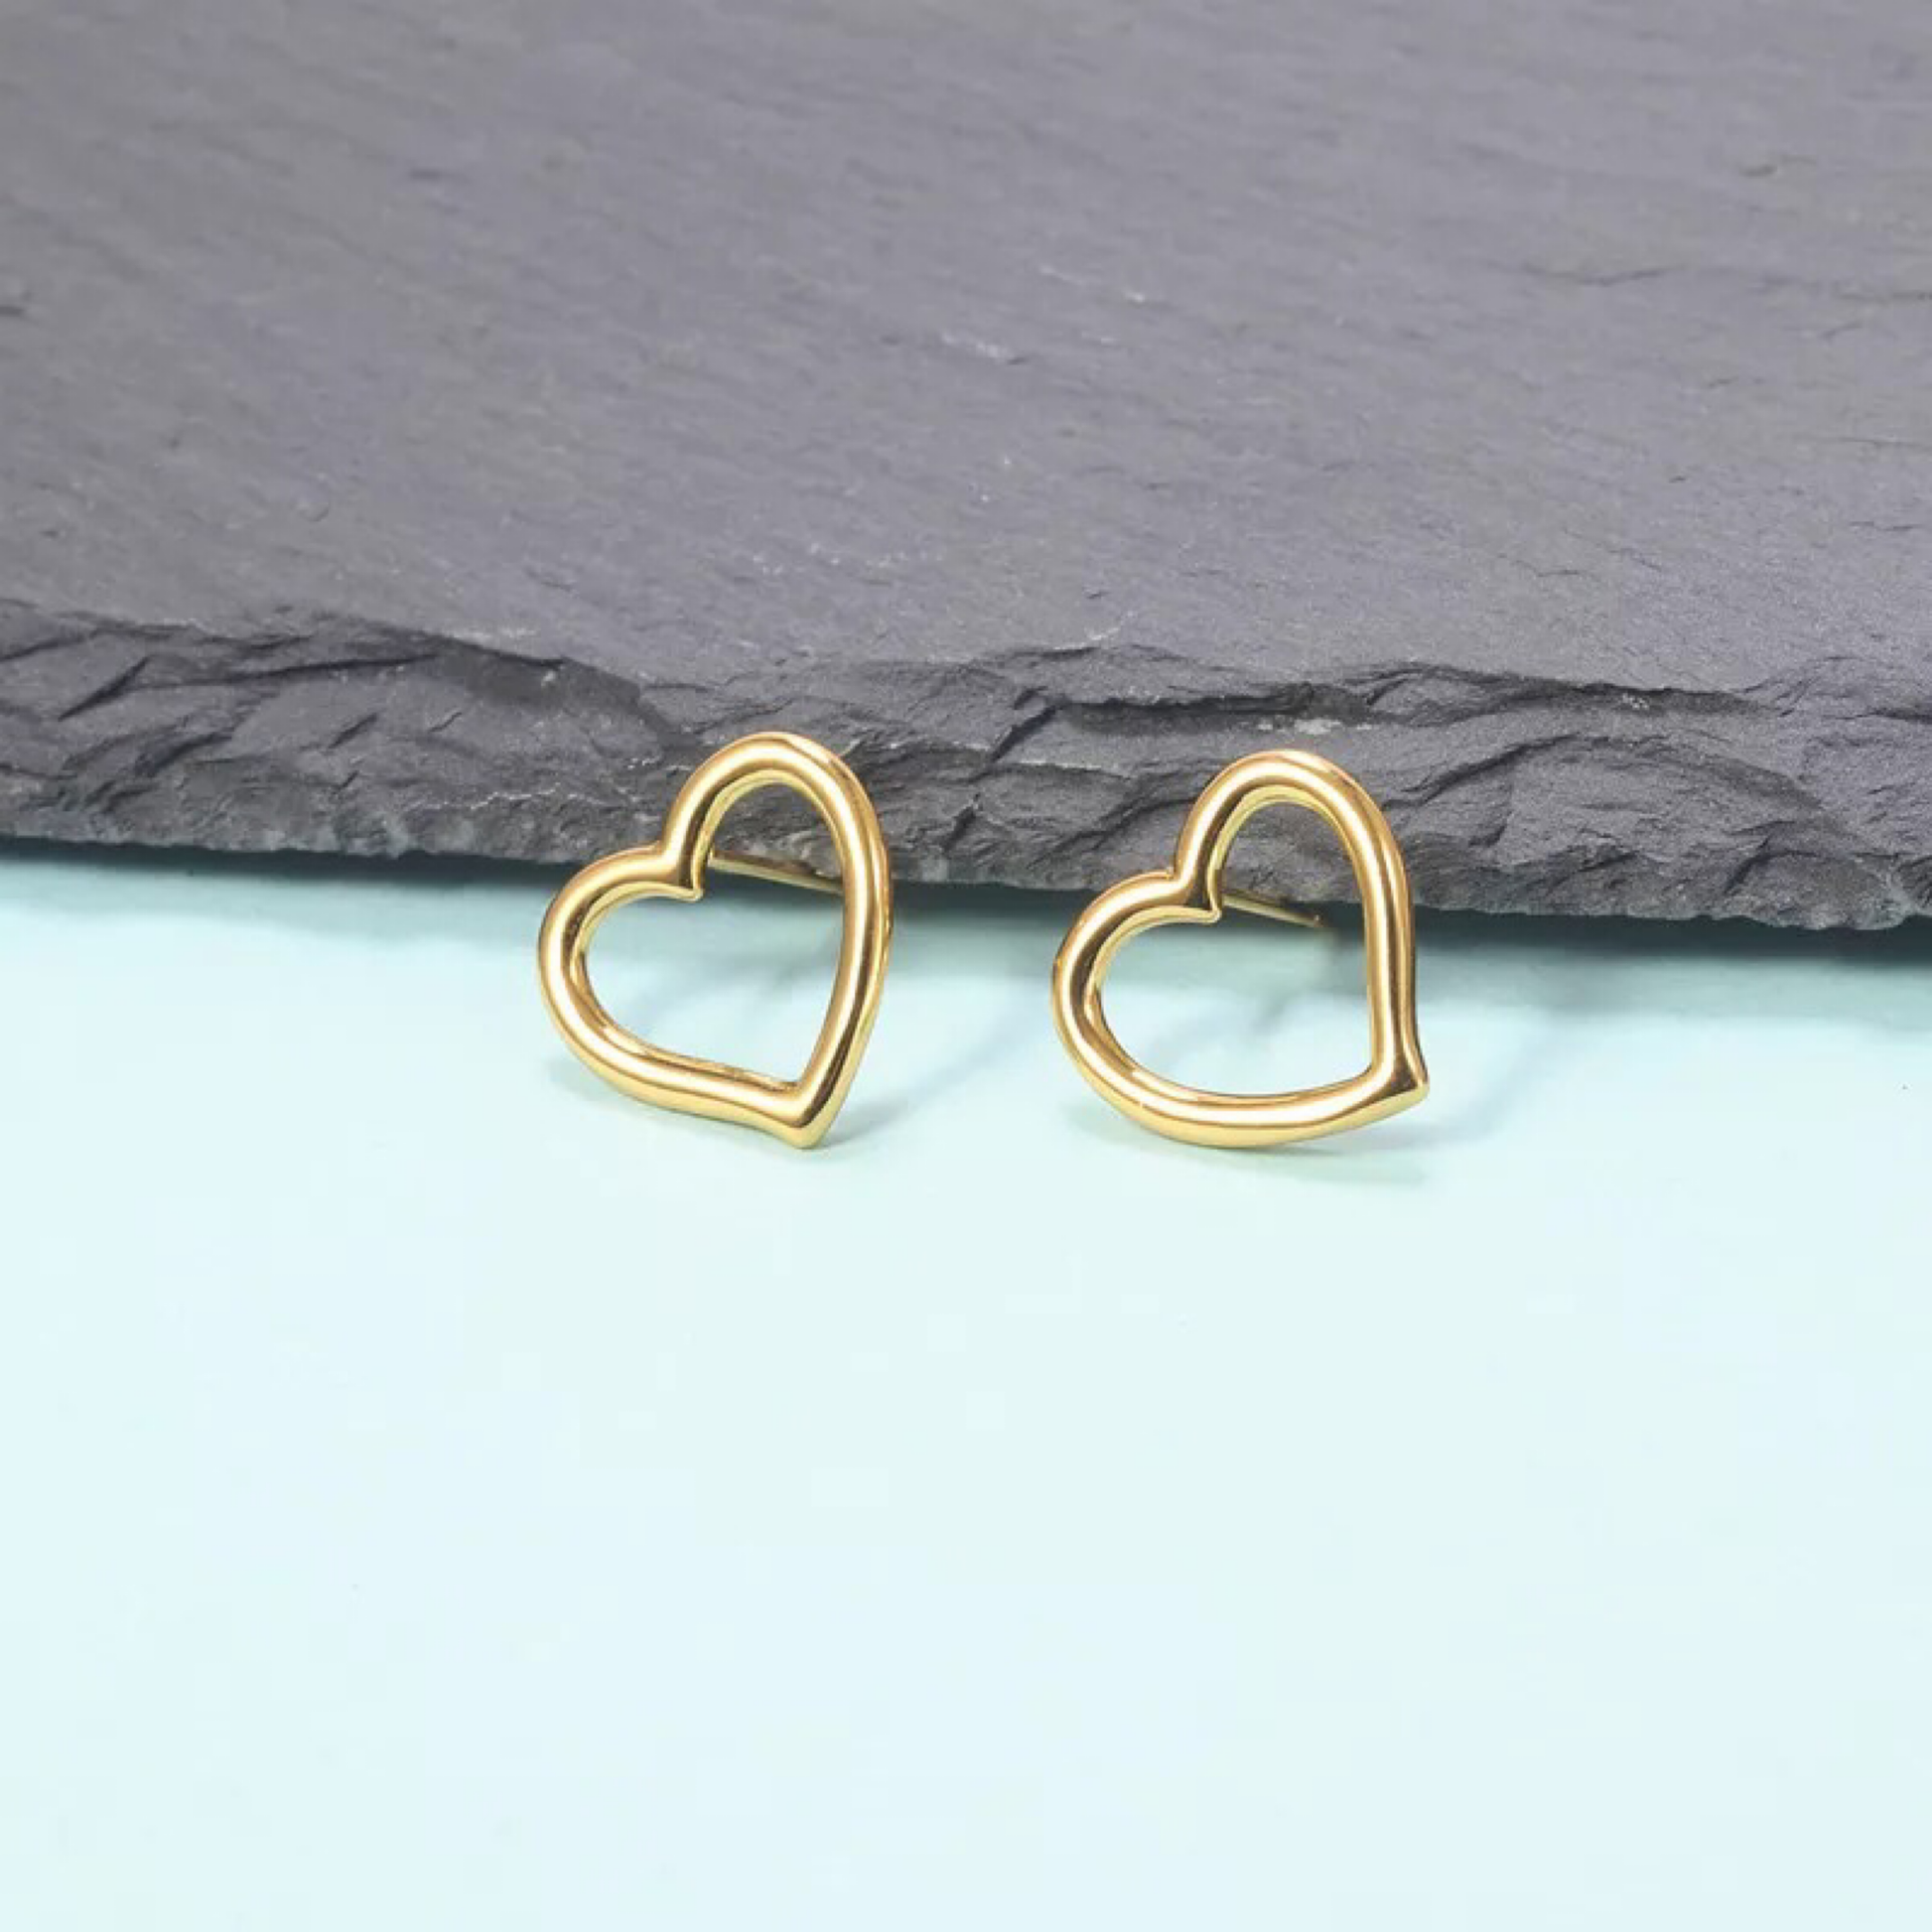 SMOOTH HEART EARRINGS | 18K Gold Plated - Unique Brazilian Jewelry (4511438045259)